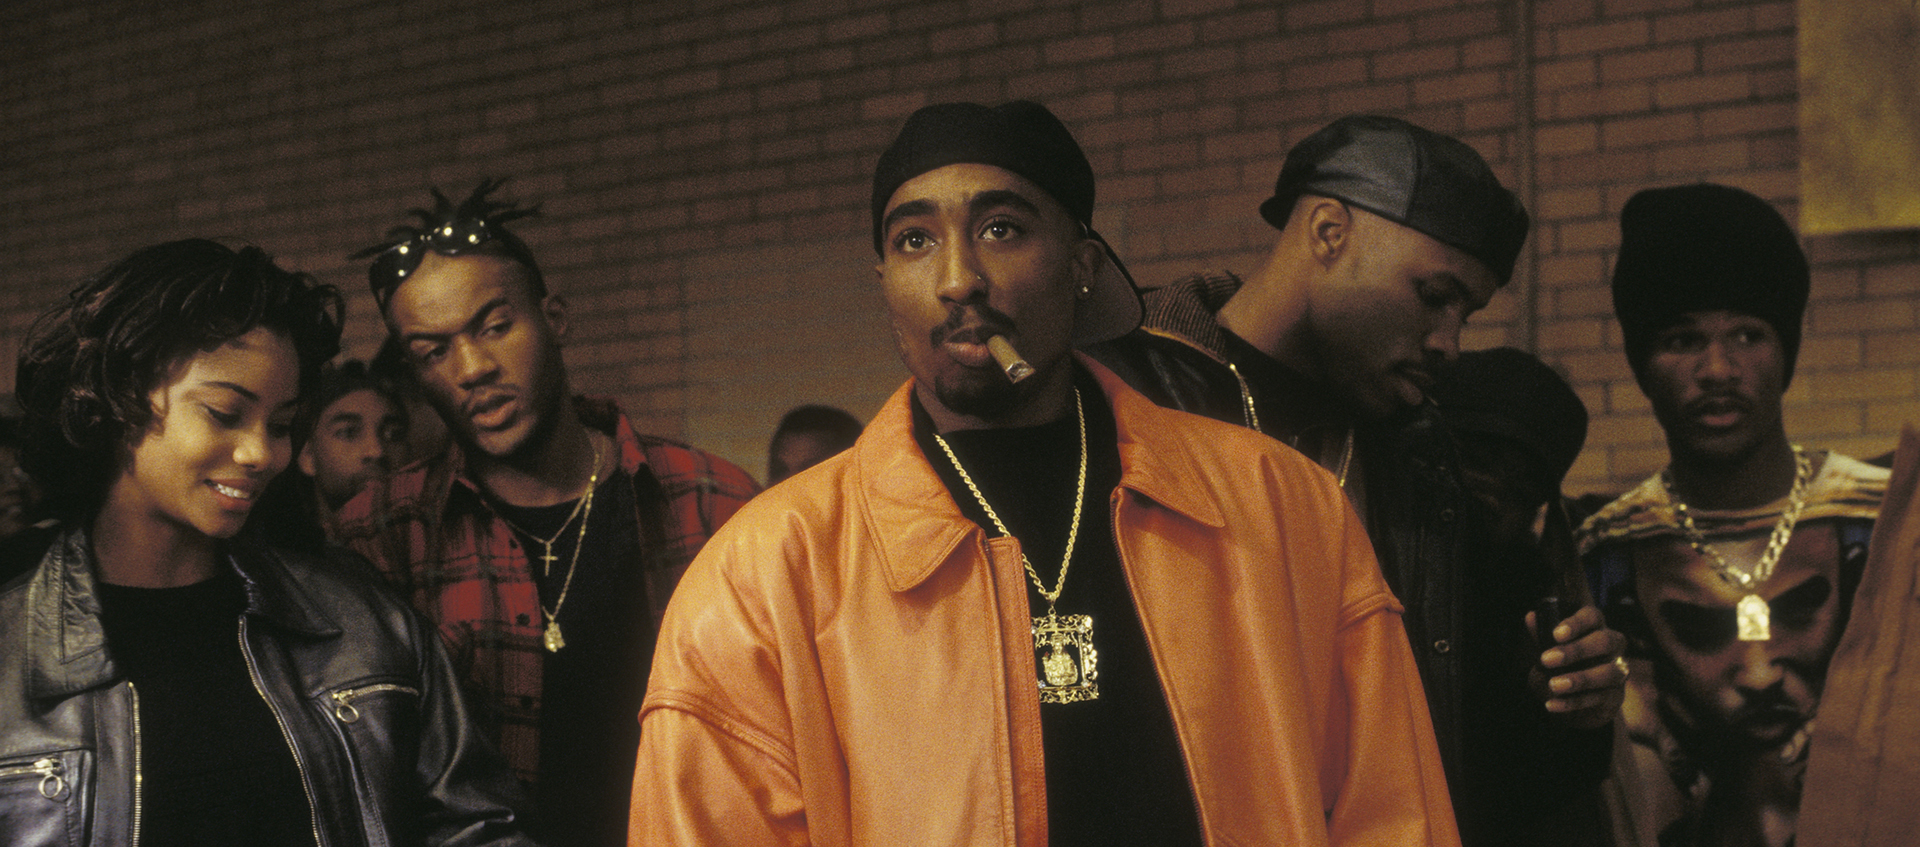 Image of Tupac as Birdie in Above the Rim, standing in a group of people.